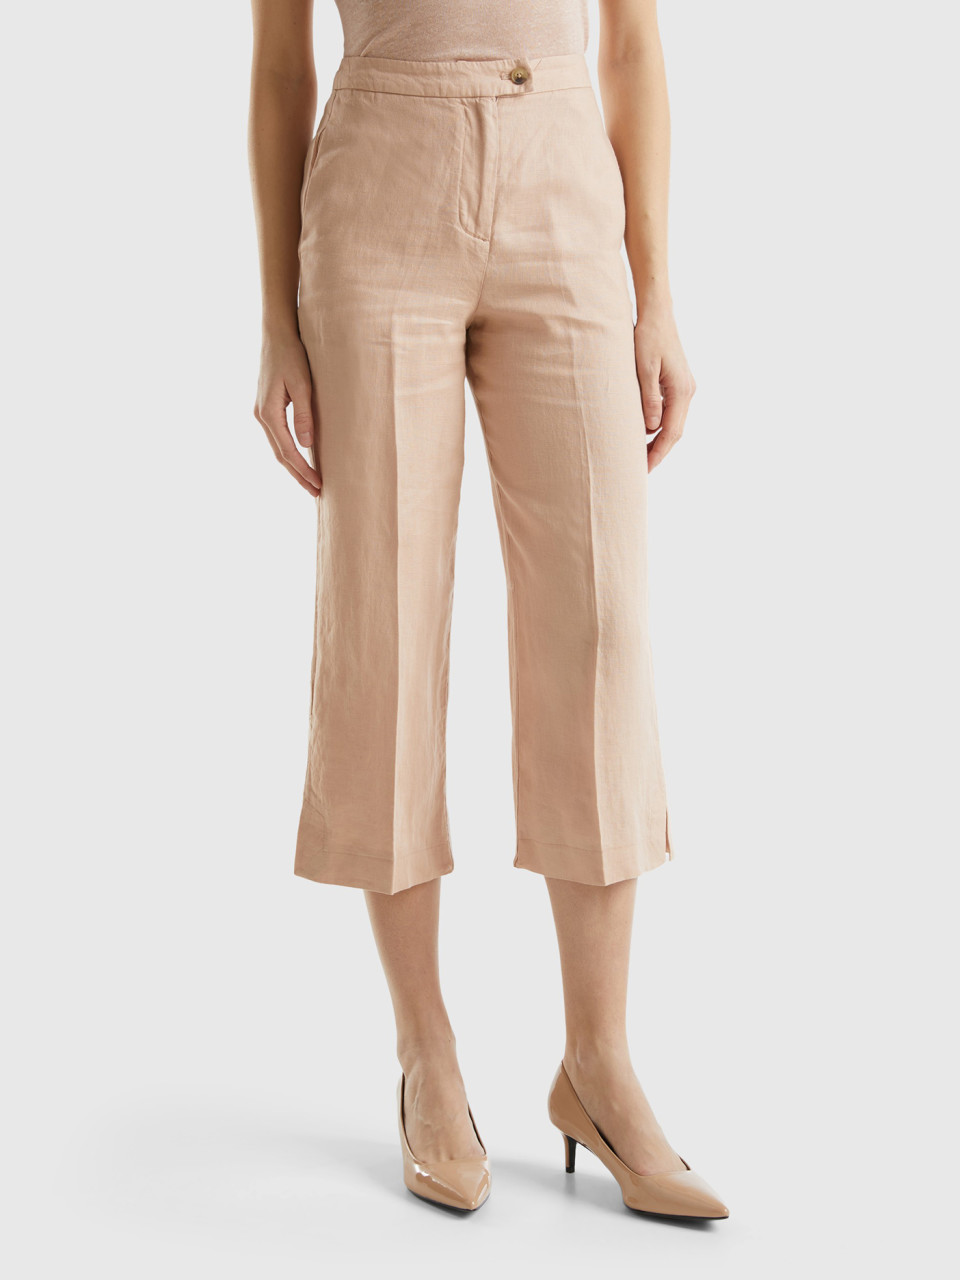 Benetton, Cropped Trousers In Pure Linen, Soft Pink, Women